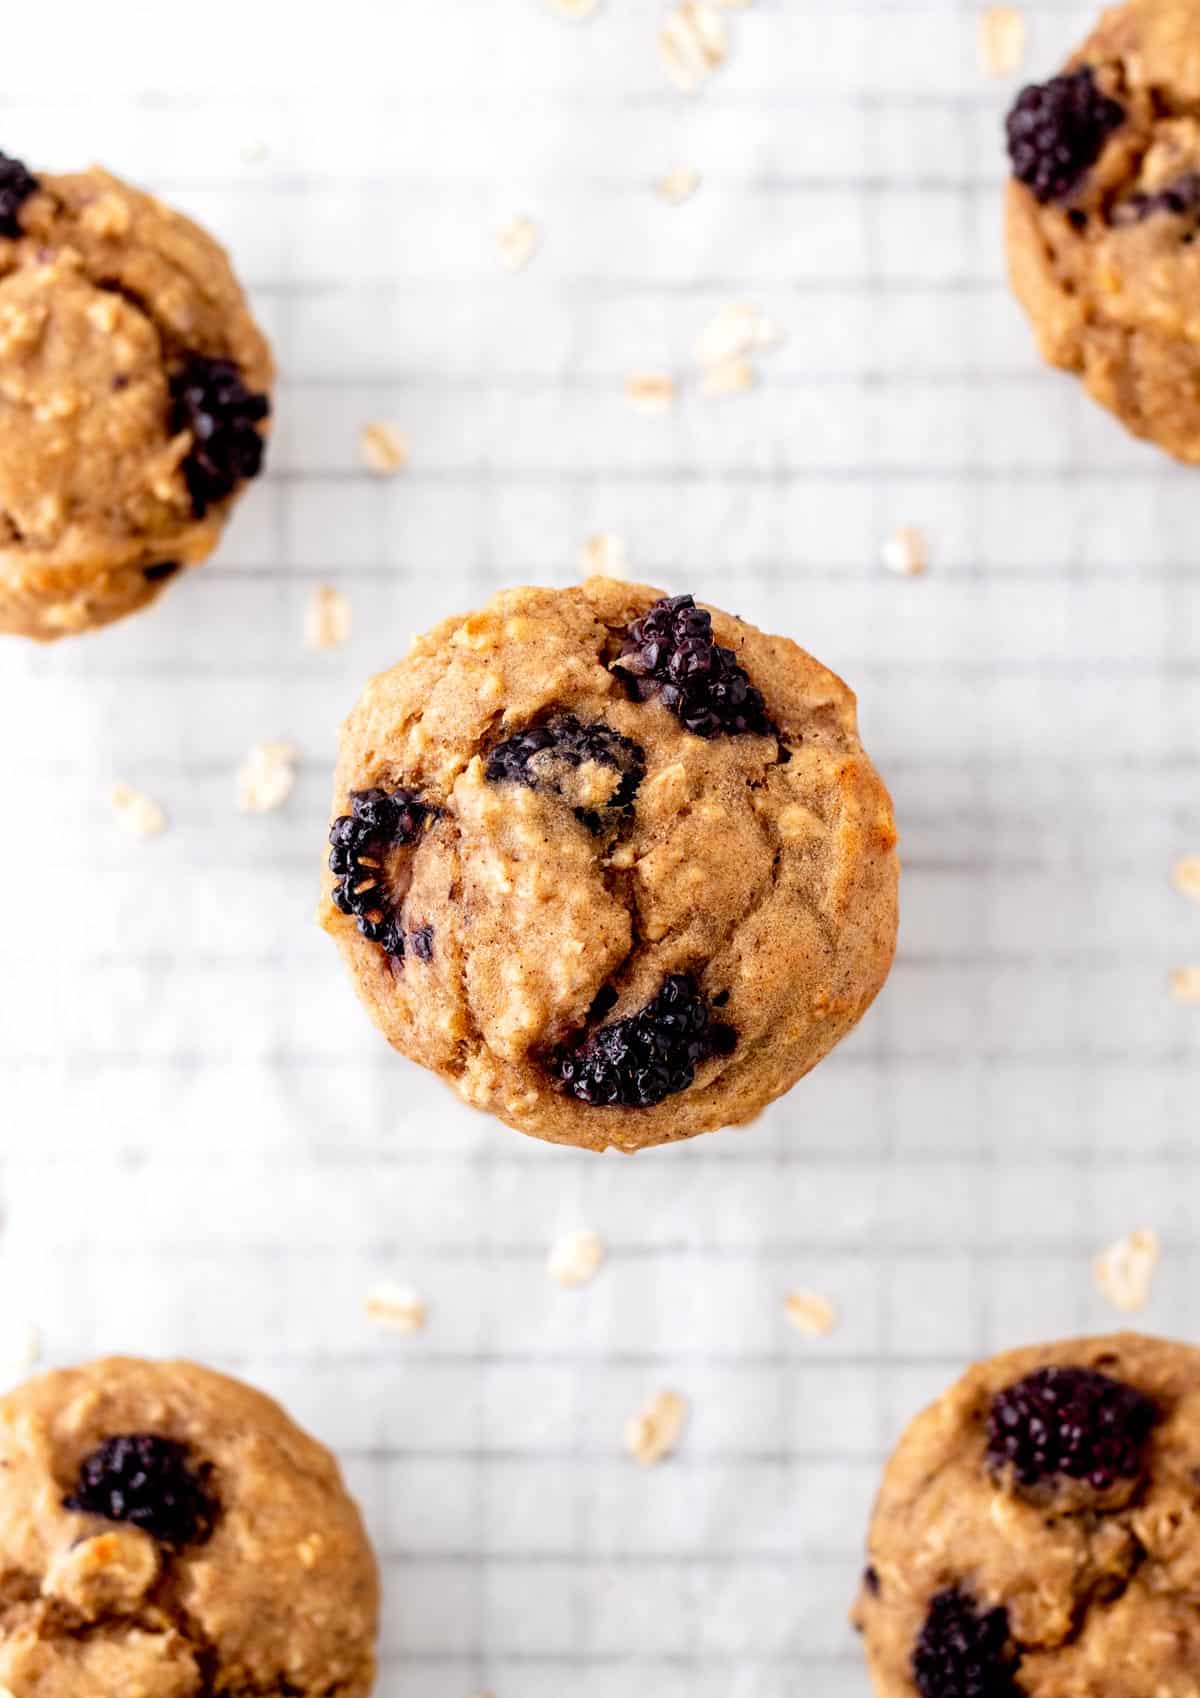 A birds-eye view of the healthy blackberry muffins spread out on a cooling rack lined with parchment paper.